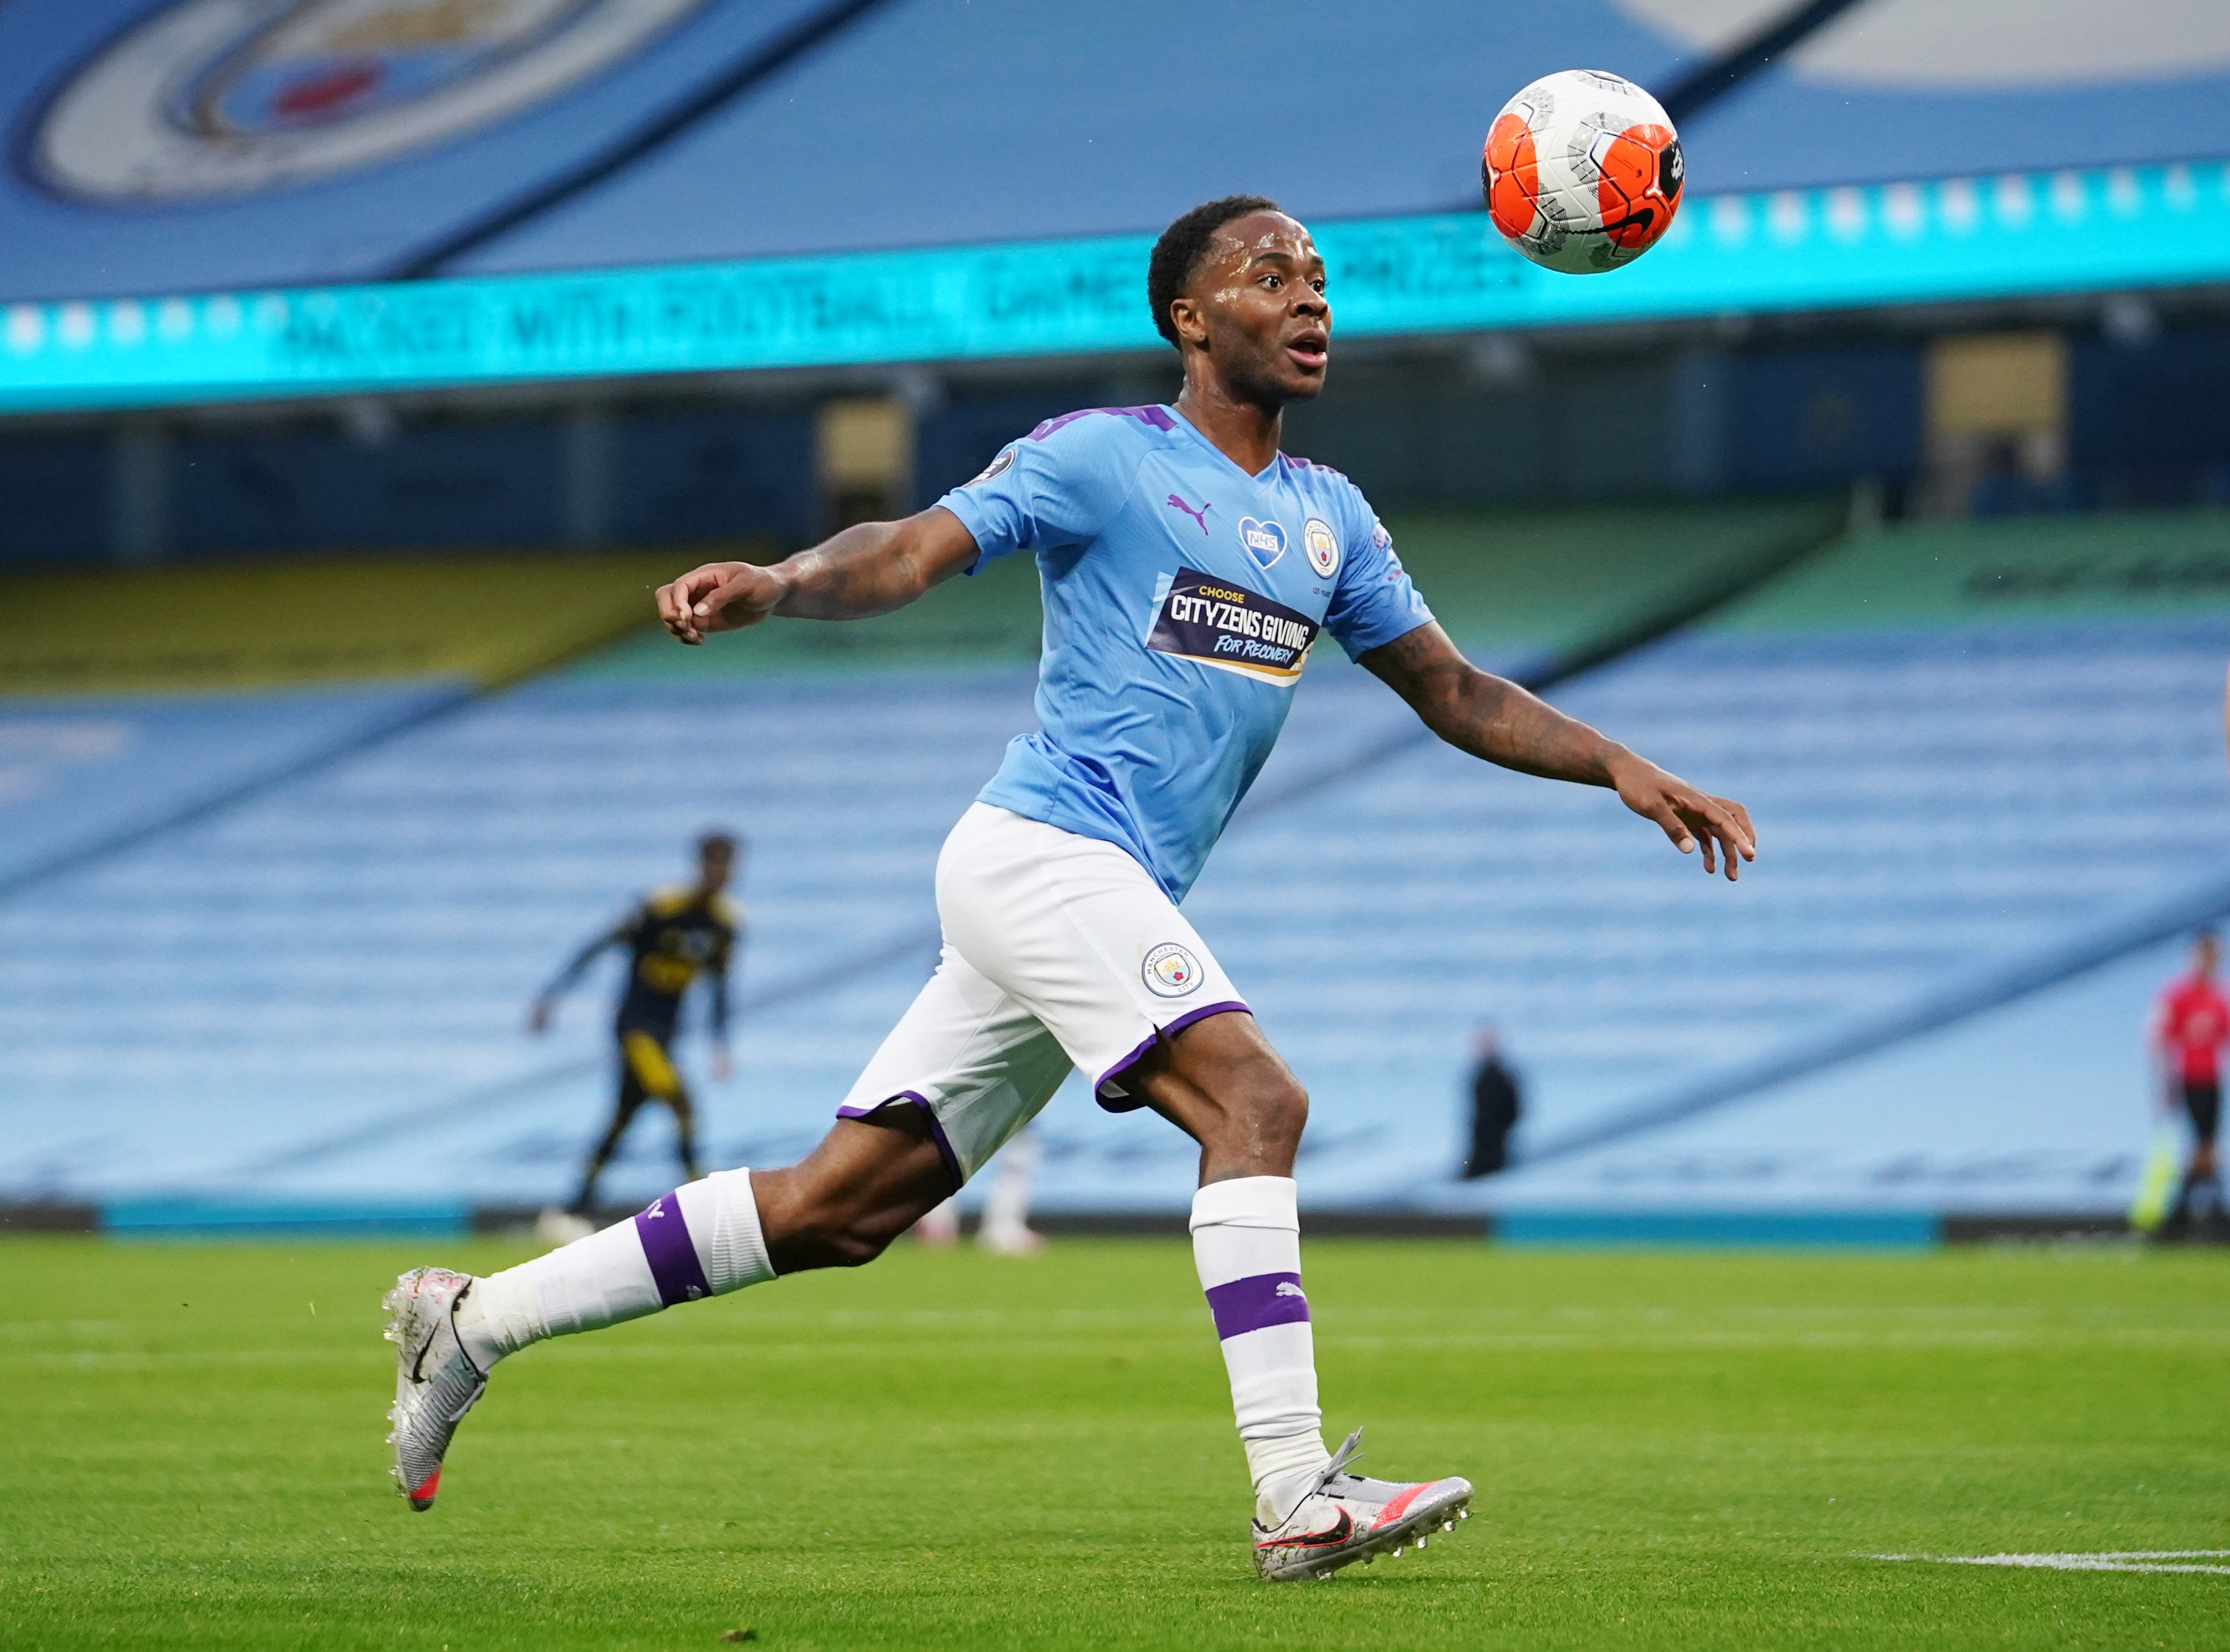 Manchester City's Raheem Sterling scores their first goal as play resumes behind closed doors following the outbreak of the coronavirus disease (COVID-19) during the Premier League match between Manchester City and Arsenal, at Etihad Stadium, in Manchester, Britain, on June 17, 2020. Photo: Dave Thompson/Pool via Reuters